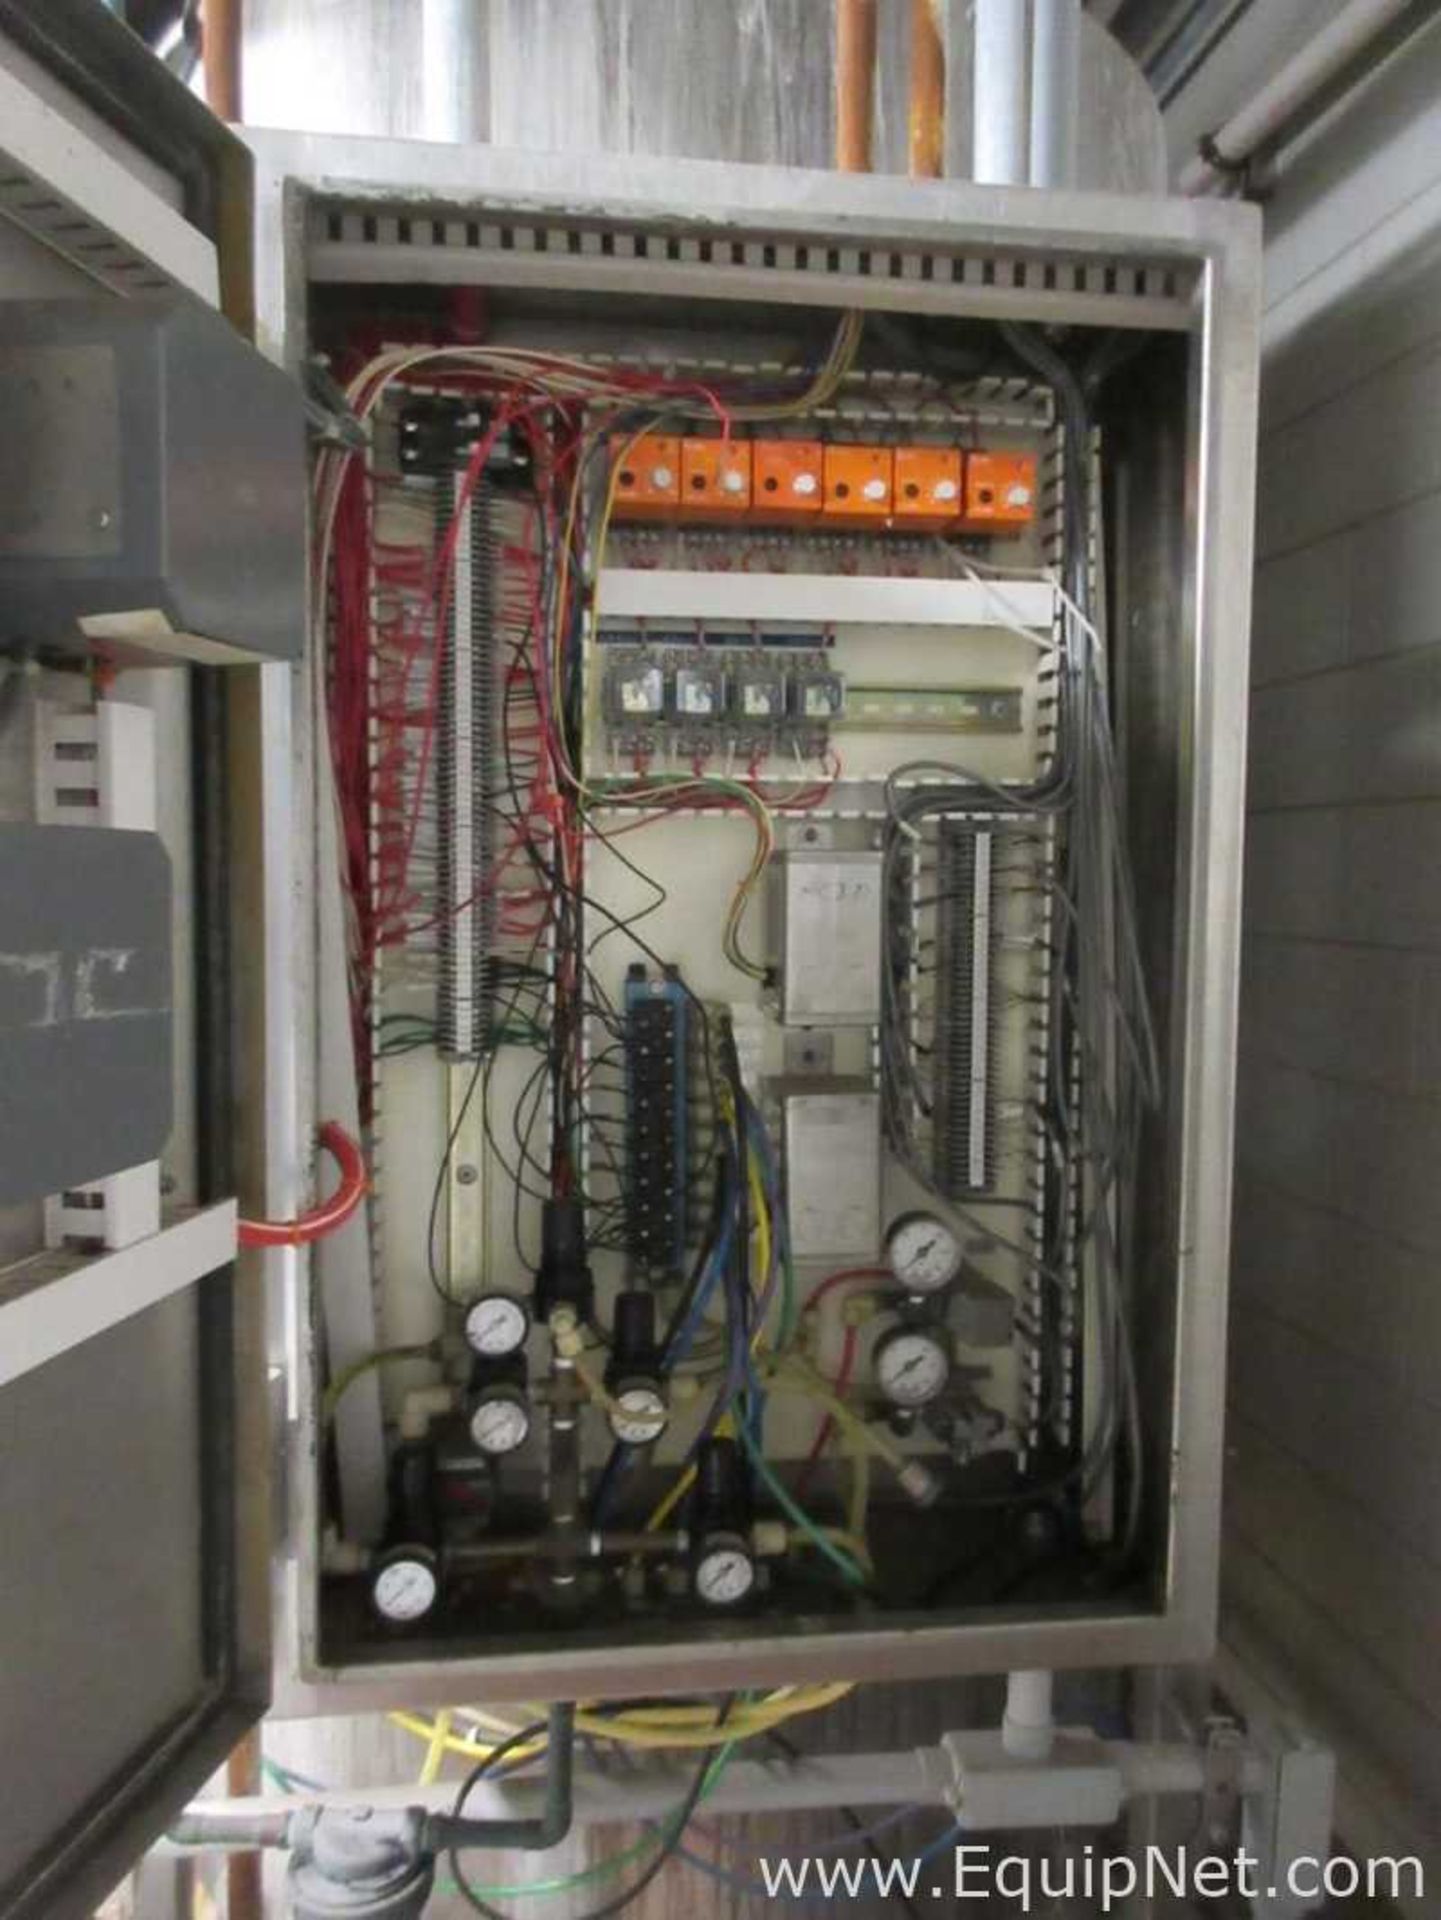 EQUIPNET LISTING #775980; REMOVAL COST: $15,754.00; DESCRIPTION: CIP System With Three Tanks, - Image 8 of 17